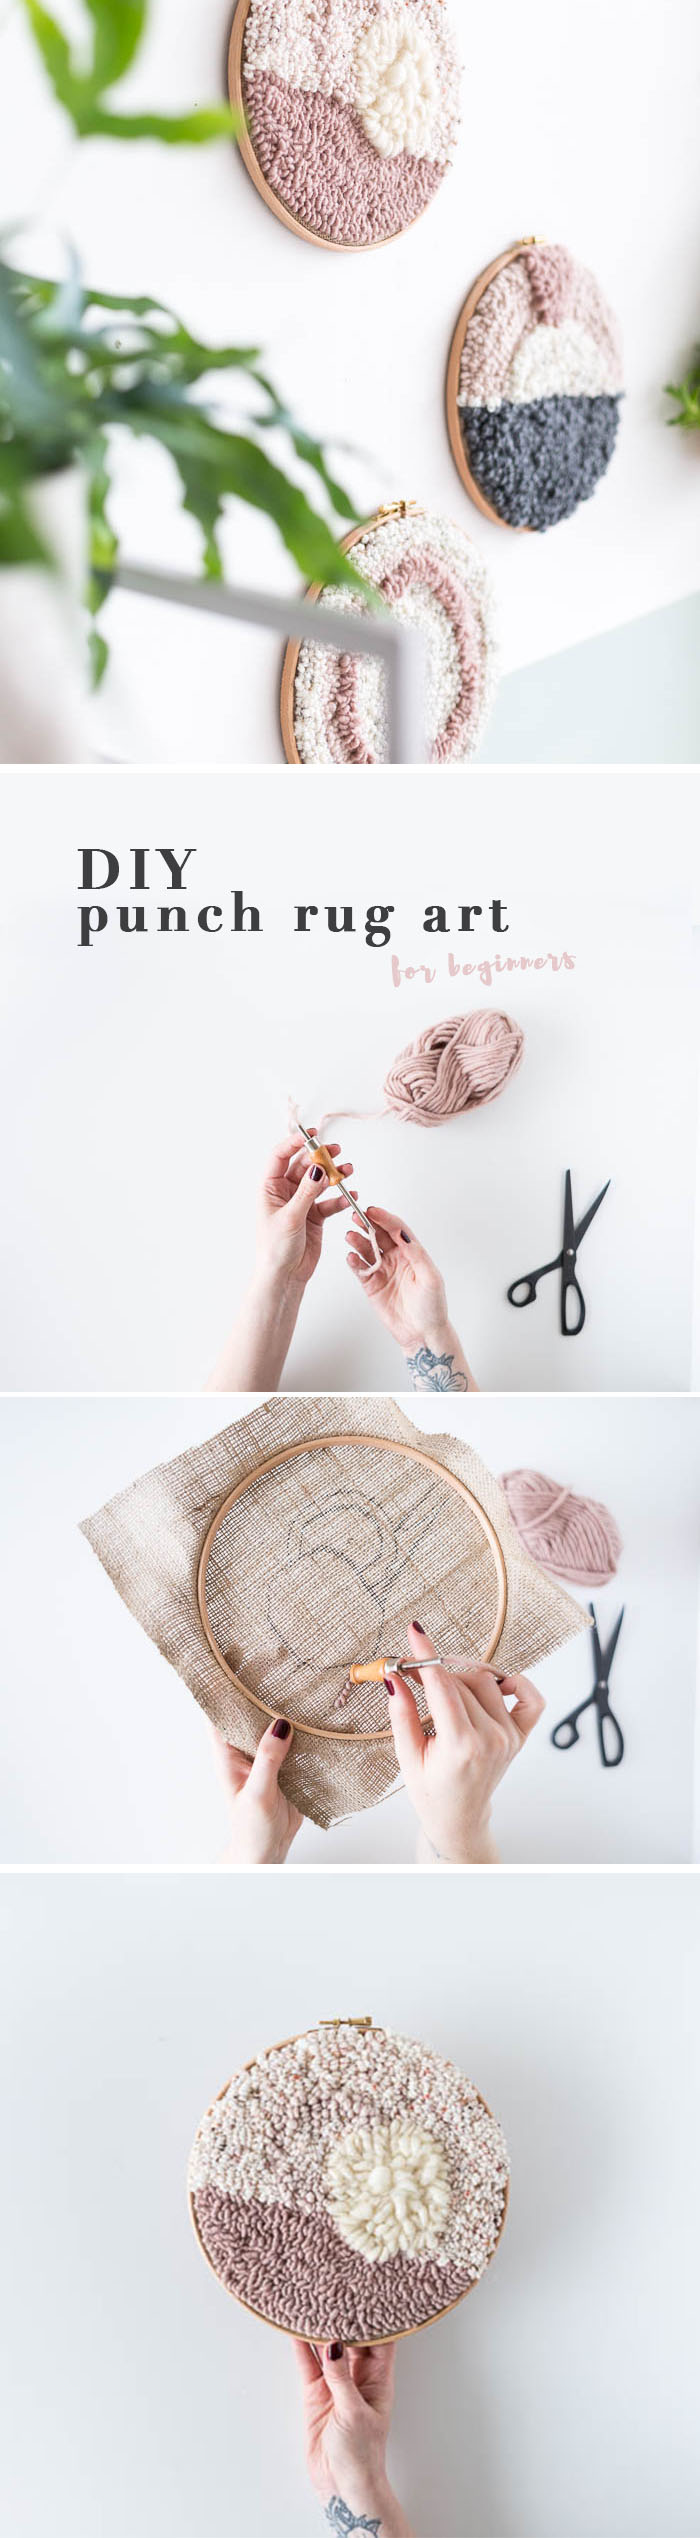 Make your own DIY Punch Rug Artwork for Beginners to create easy and unique wall art for your home. Click through for the tutorial!